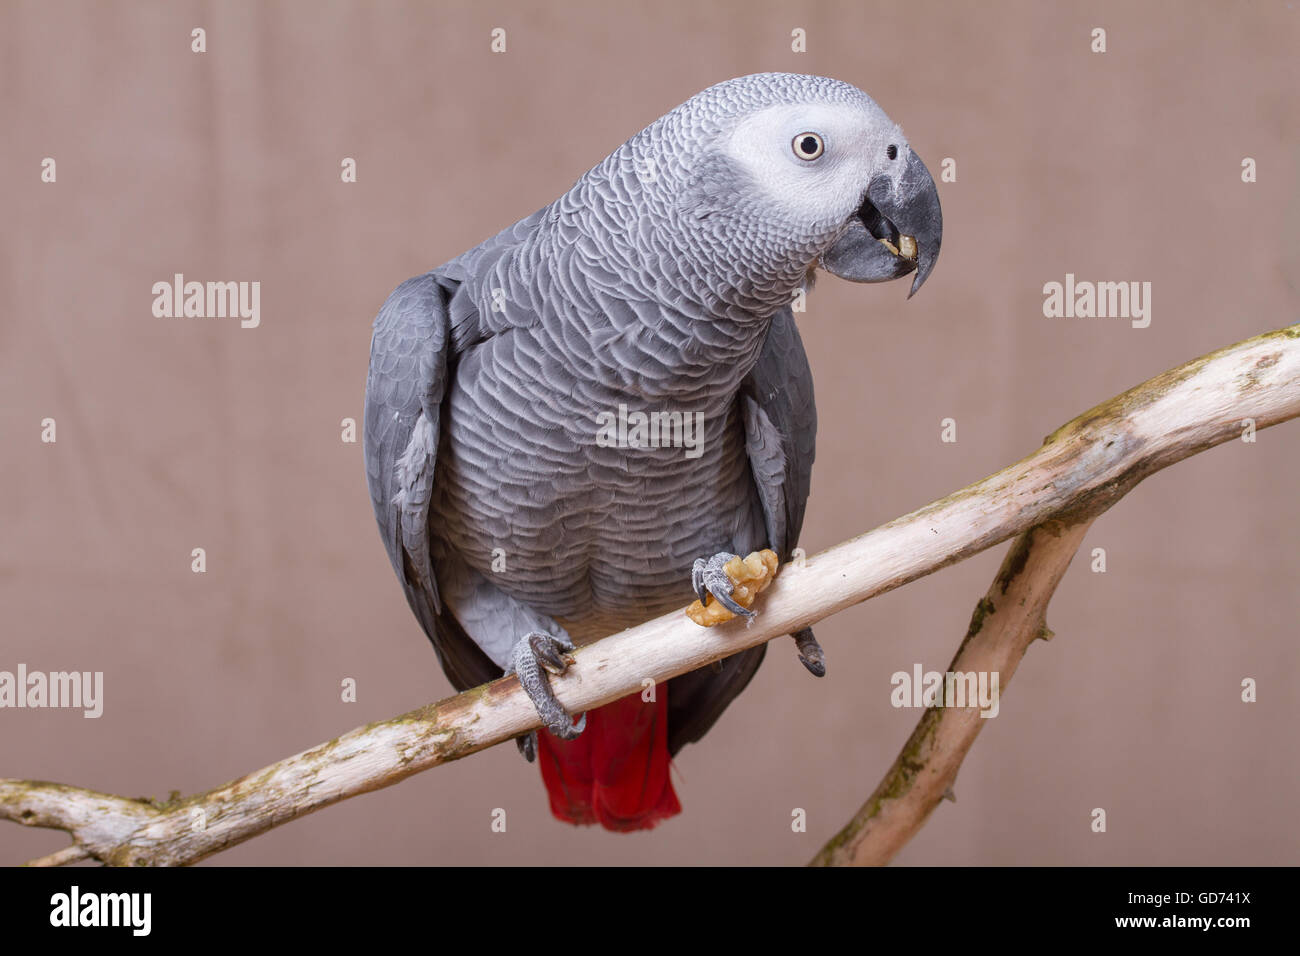 African Grey parrot eating a nut whilst perched on a wooden stick. Stock Photo